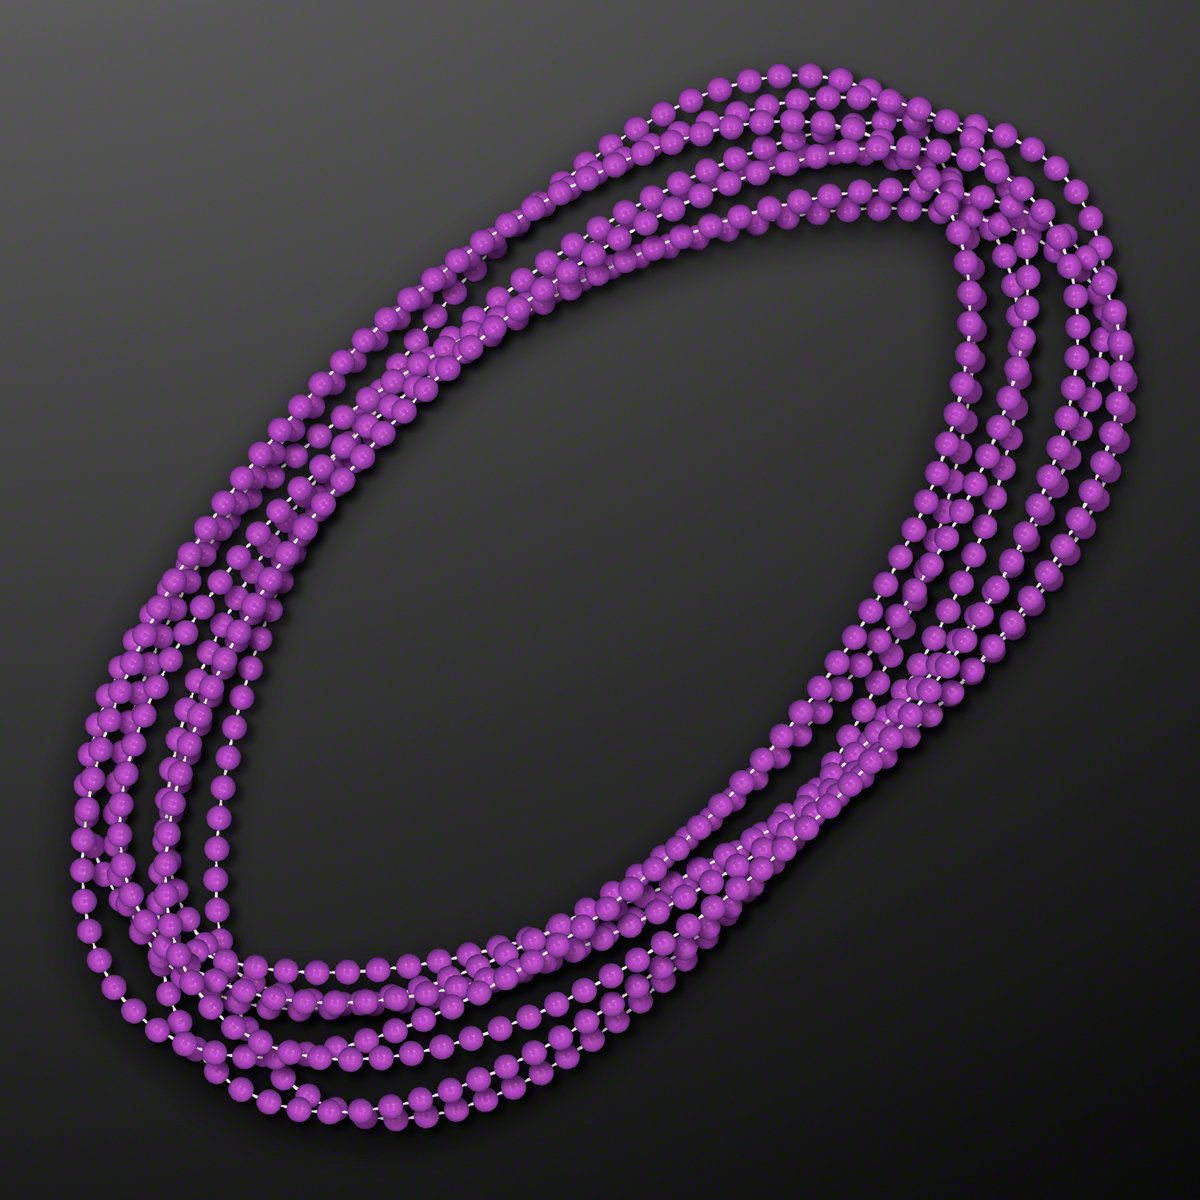 Silver Mardi Gras Beads  Oval Bead Necklaces - 33 Long